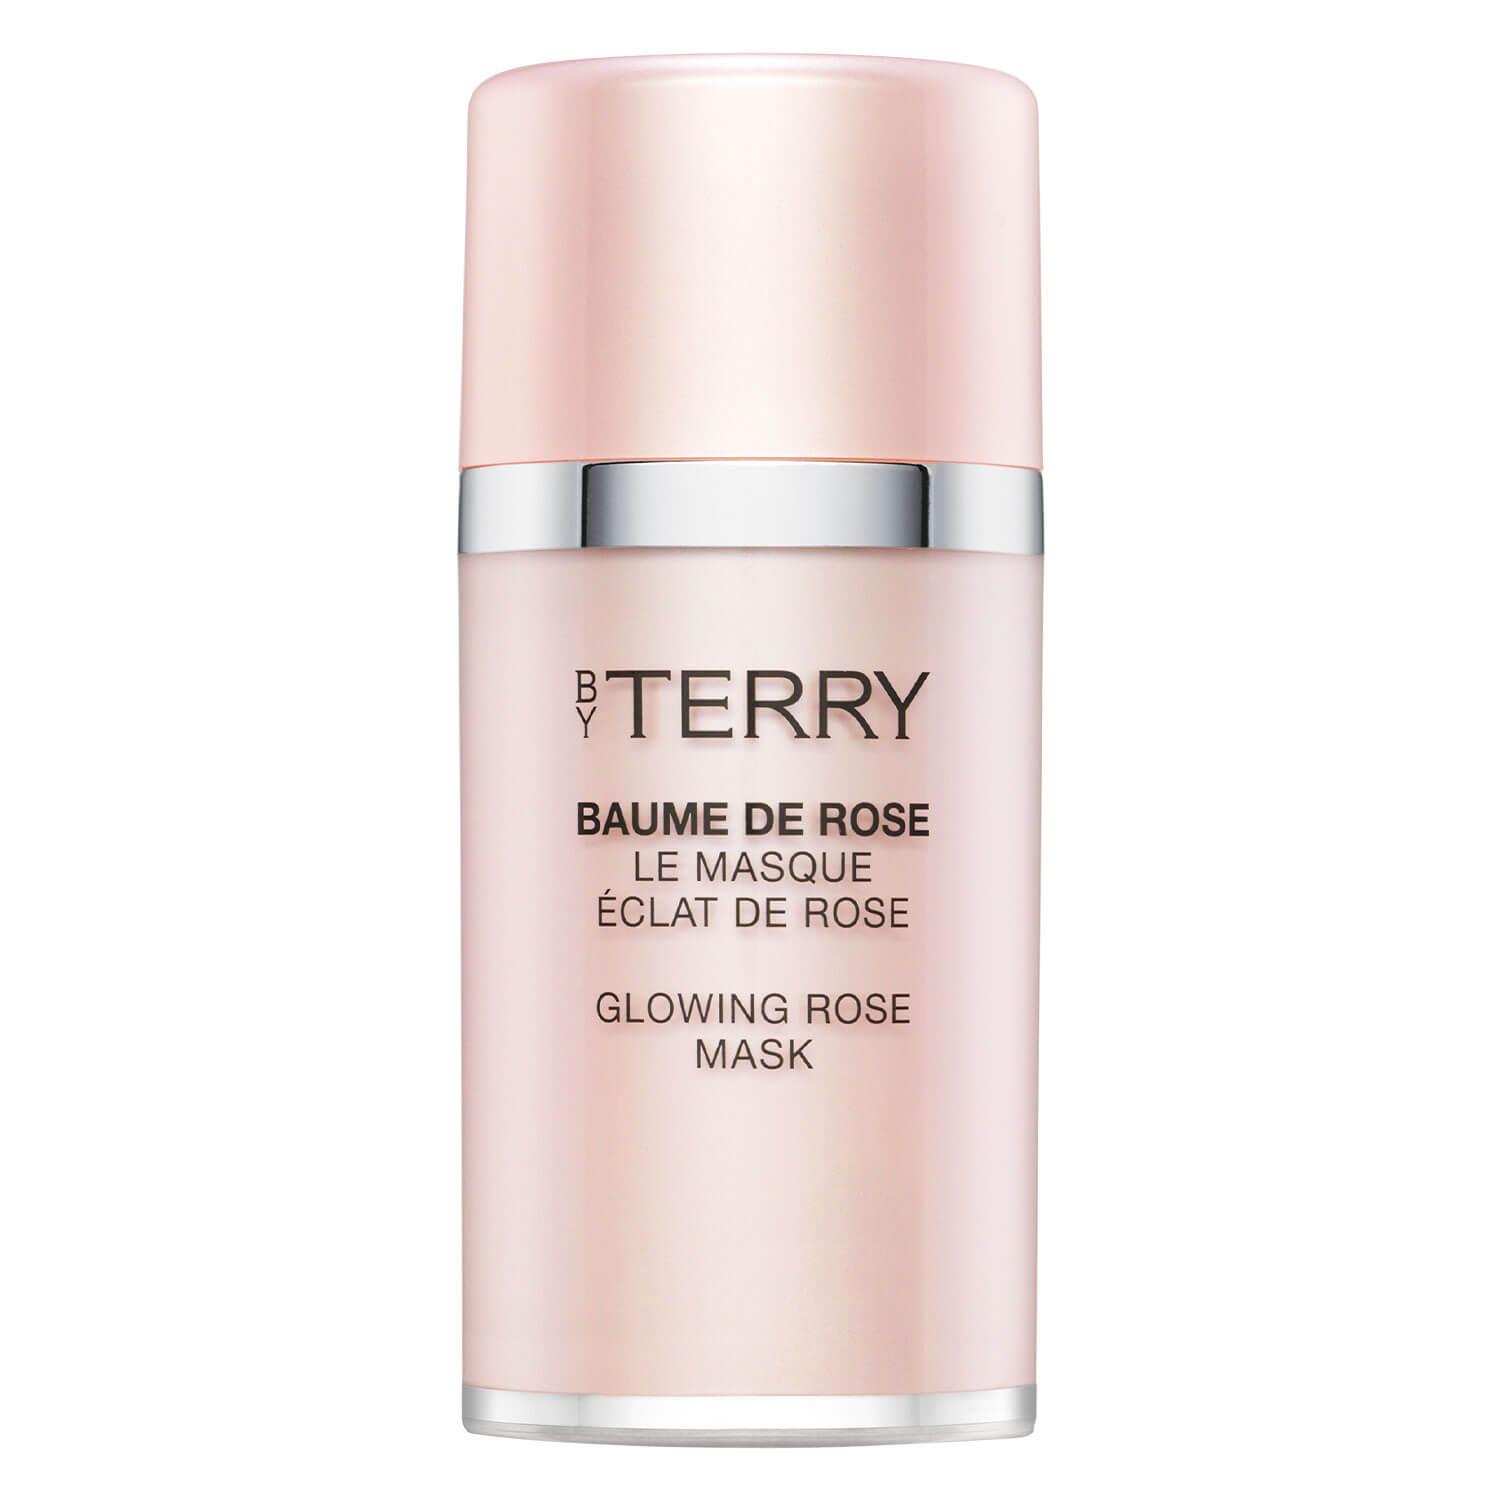 By Terry Care - Baume de Rose Glowing Mask